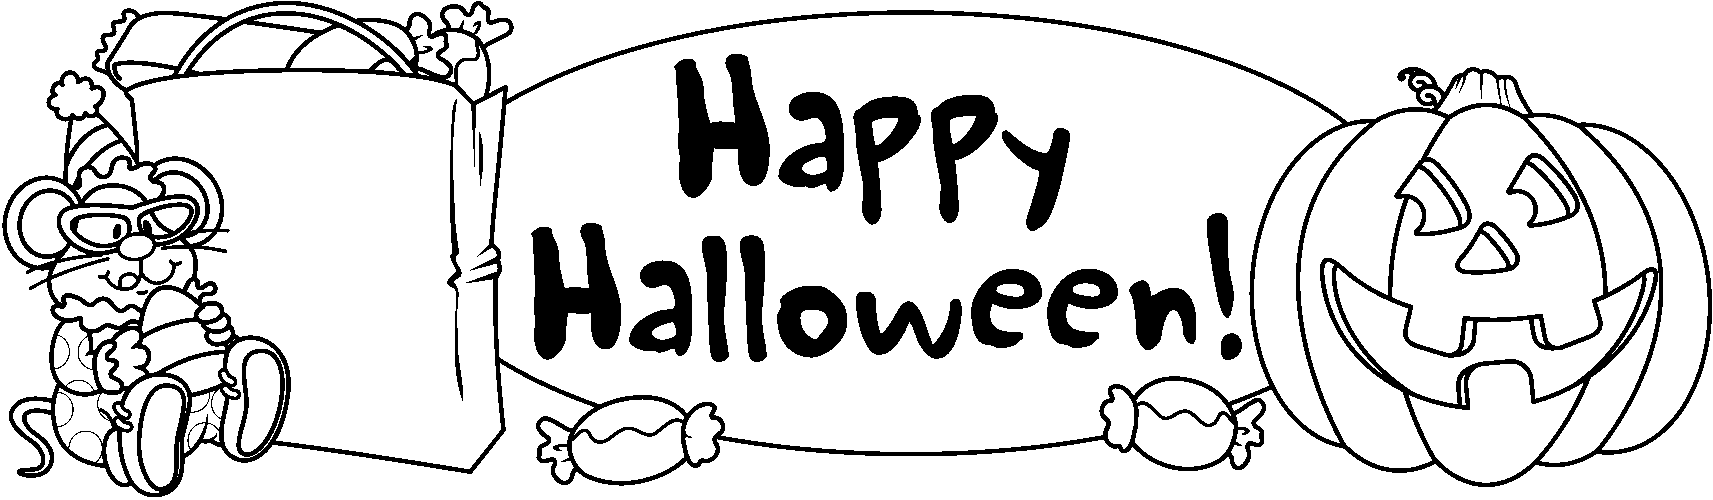 Halloween  black and white black and white halloween clipart